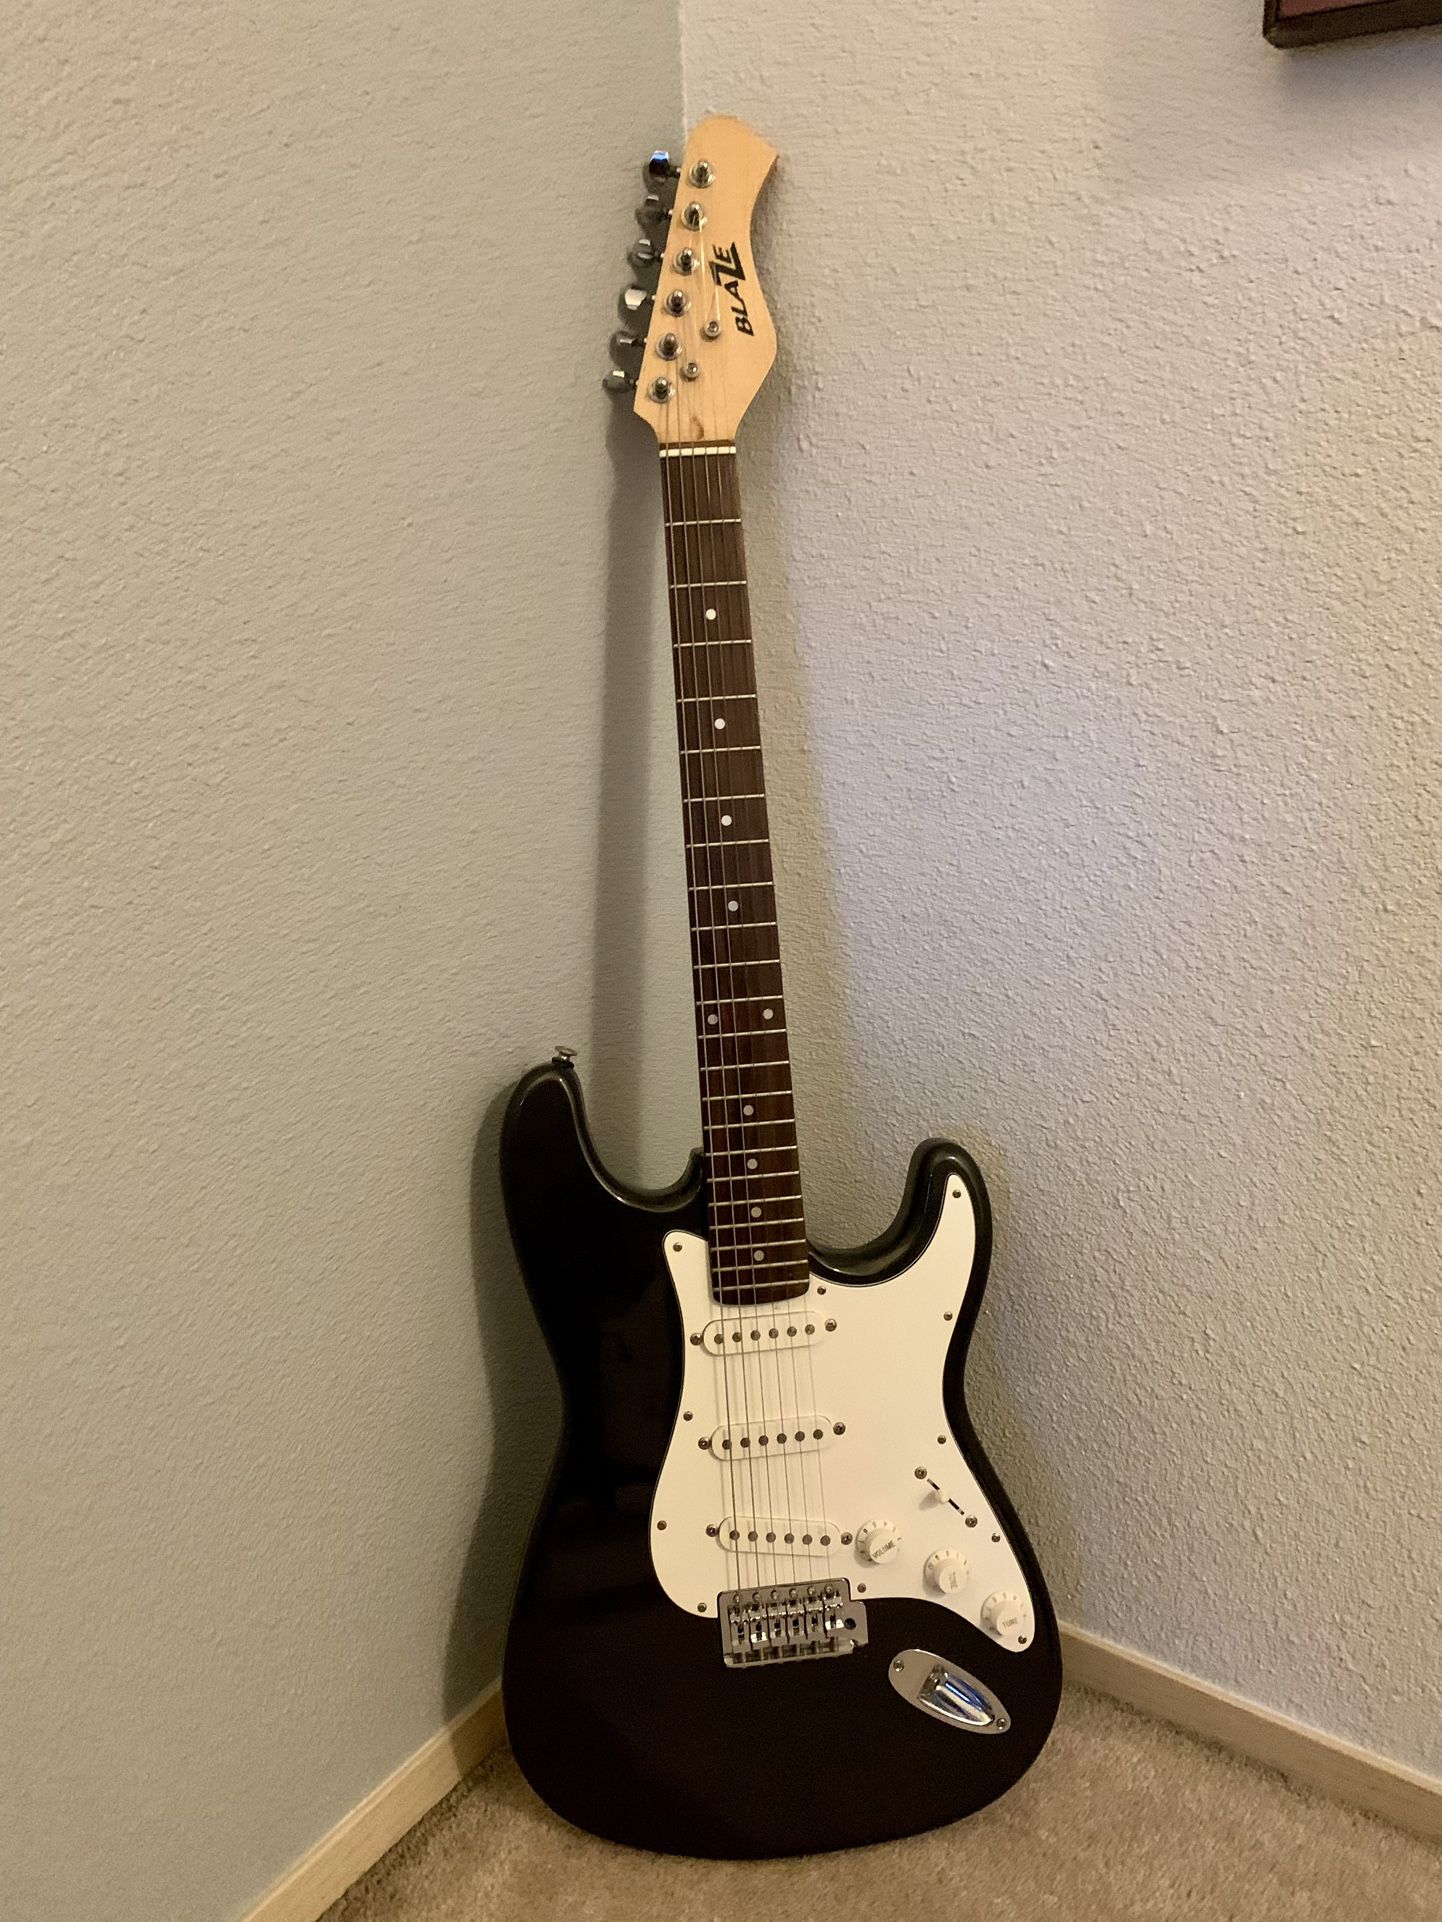 Stratocaster Copy Guitar With Peavey Practice Amp